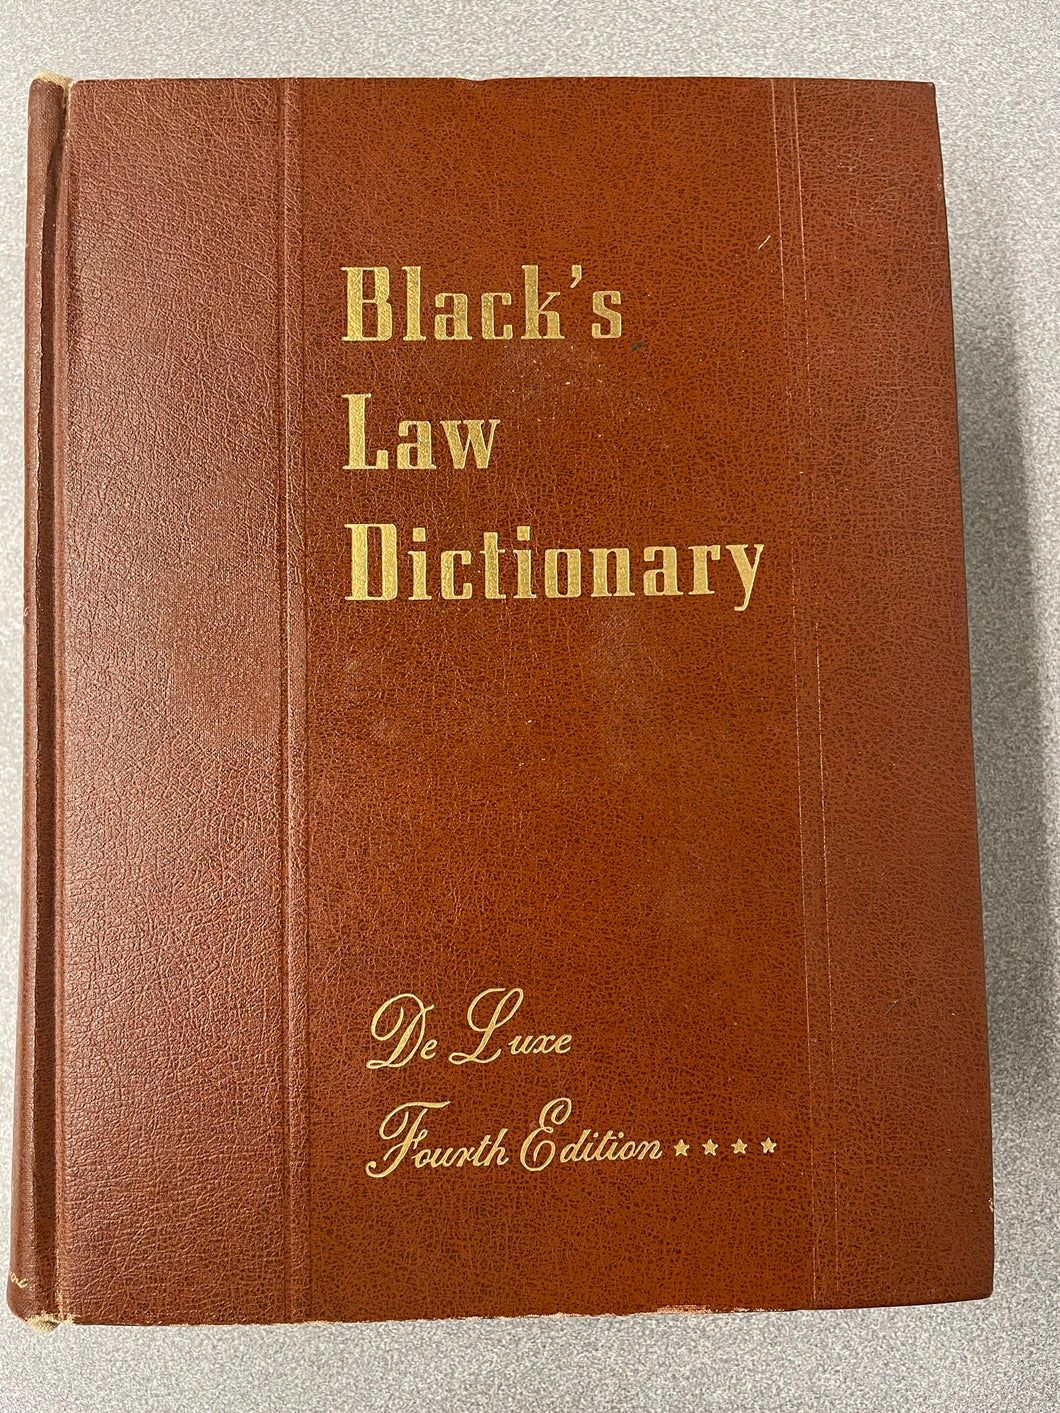 REF   Black's Law Dictionary [1957] N 8/23